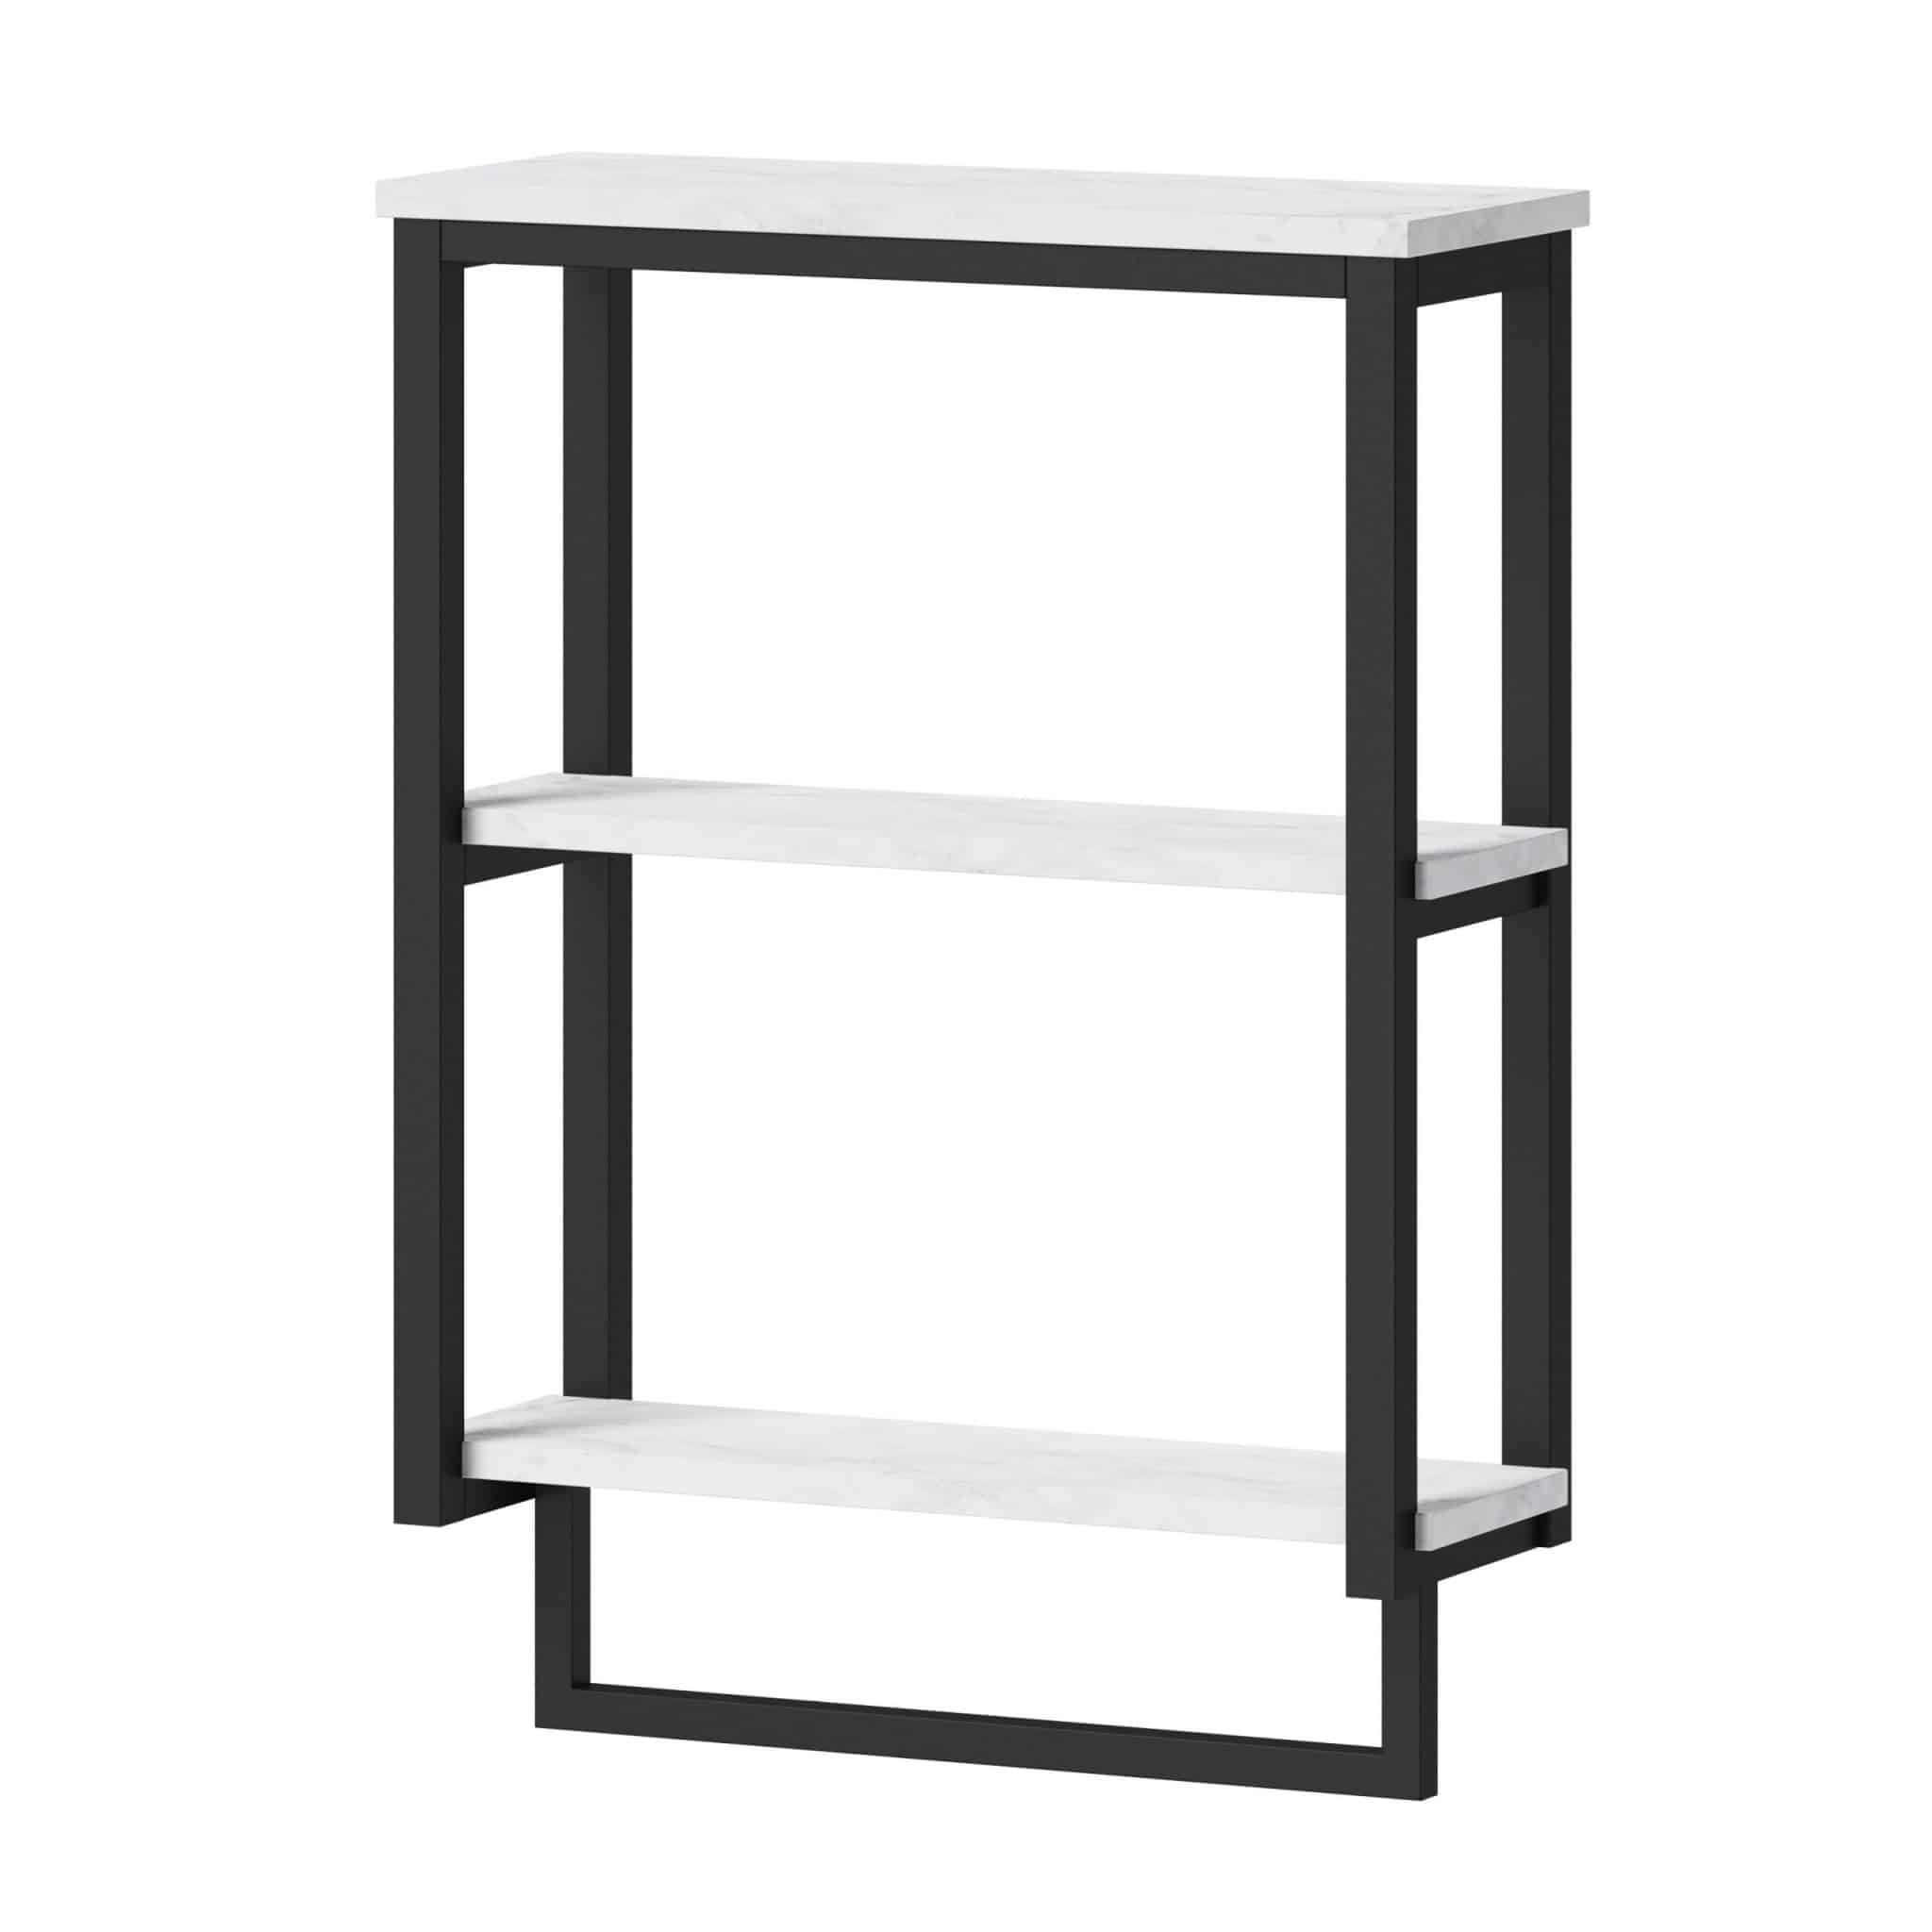 Tolley 8.07 W x 114.96 H x 12.8 D Wall Mounted Bathroom Shelves Rebrilliant Finish: Black